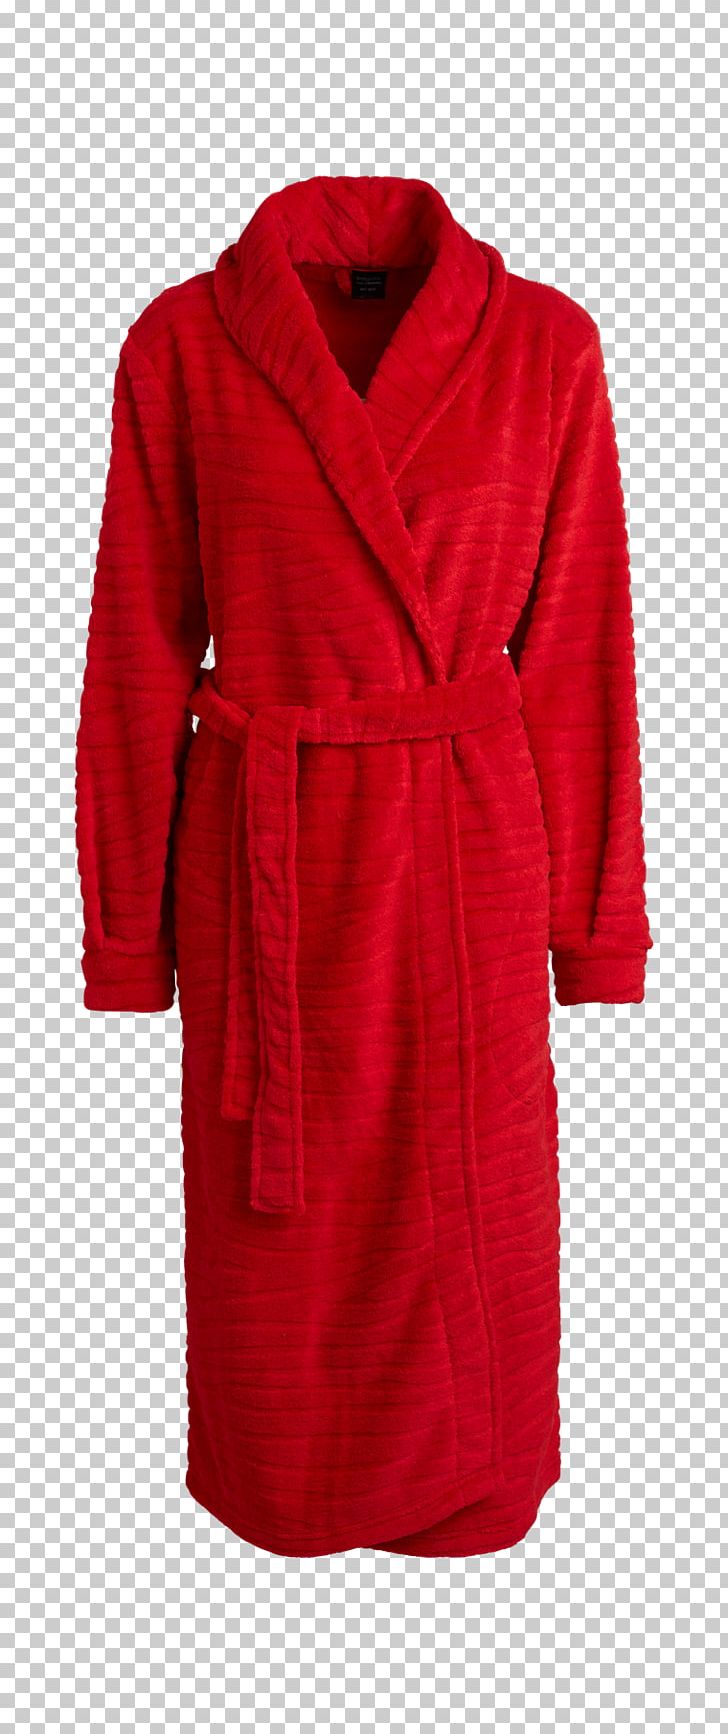 T-shirt Robe Skirt Coat Discounts And Allowances PNG, Clipart, Blouse, Clothing, Clothing Accessories, Coat, Day Dress Free PNG Download